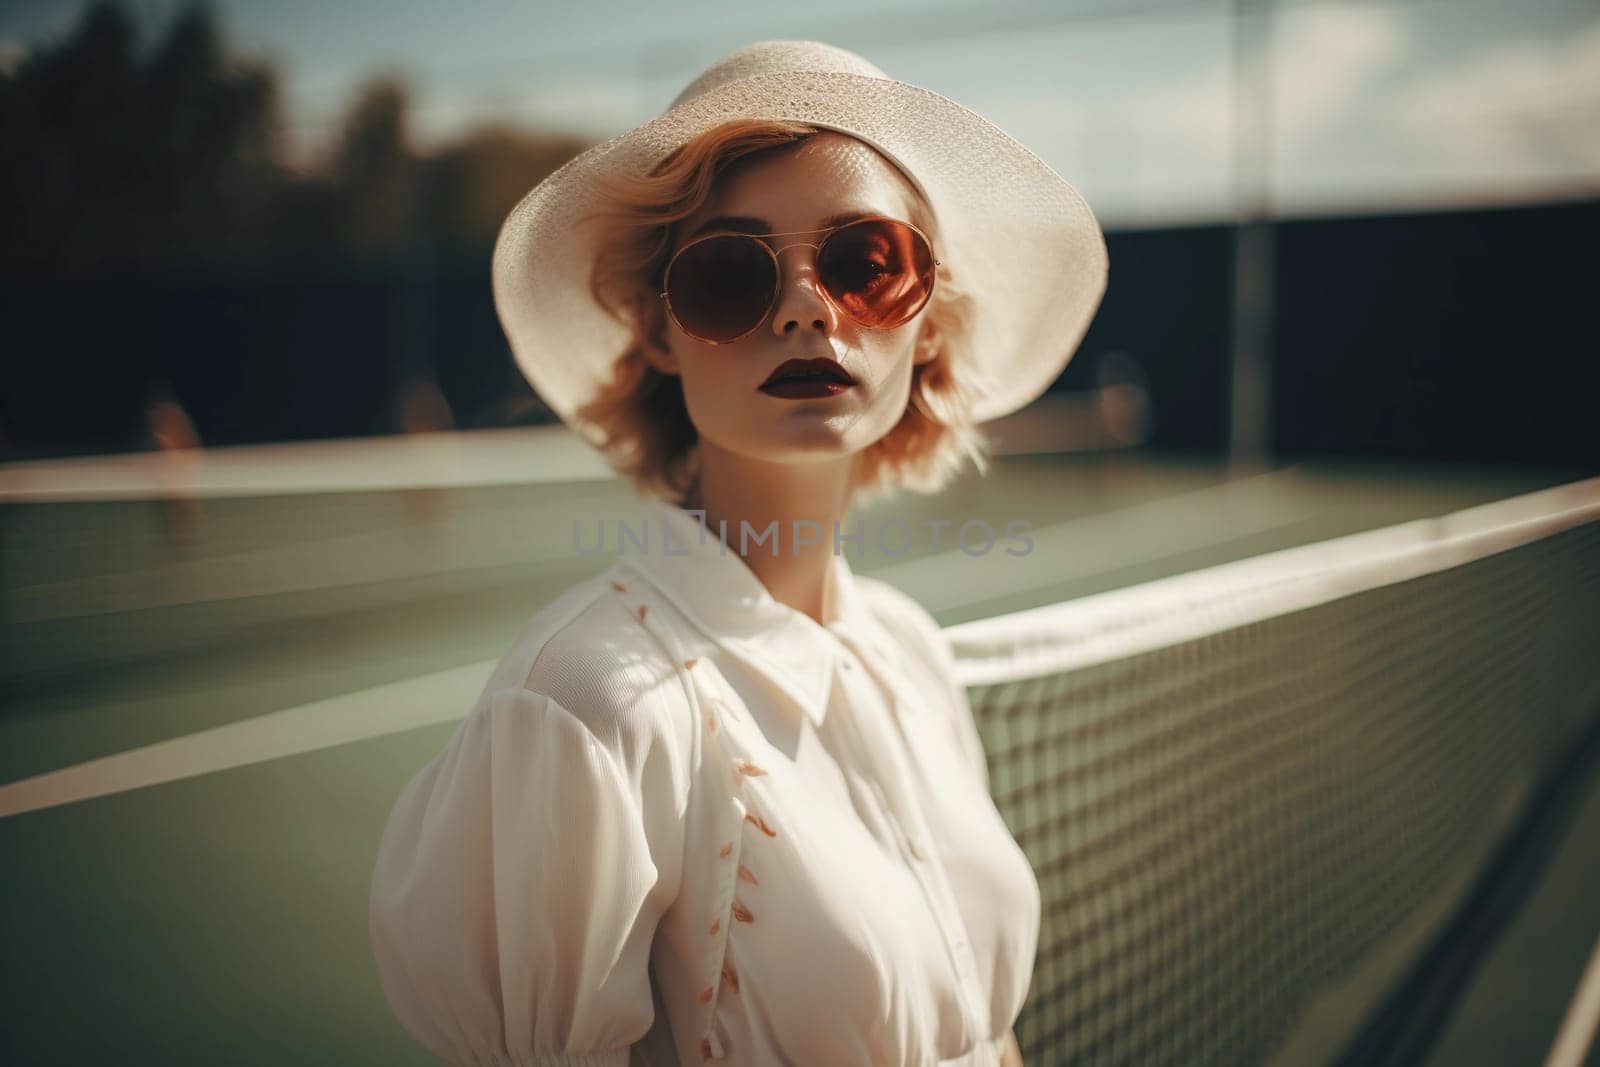 A woman wearing sunglasses and a hat stands on a tennis court.